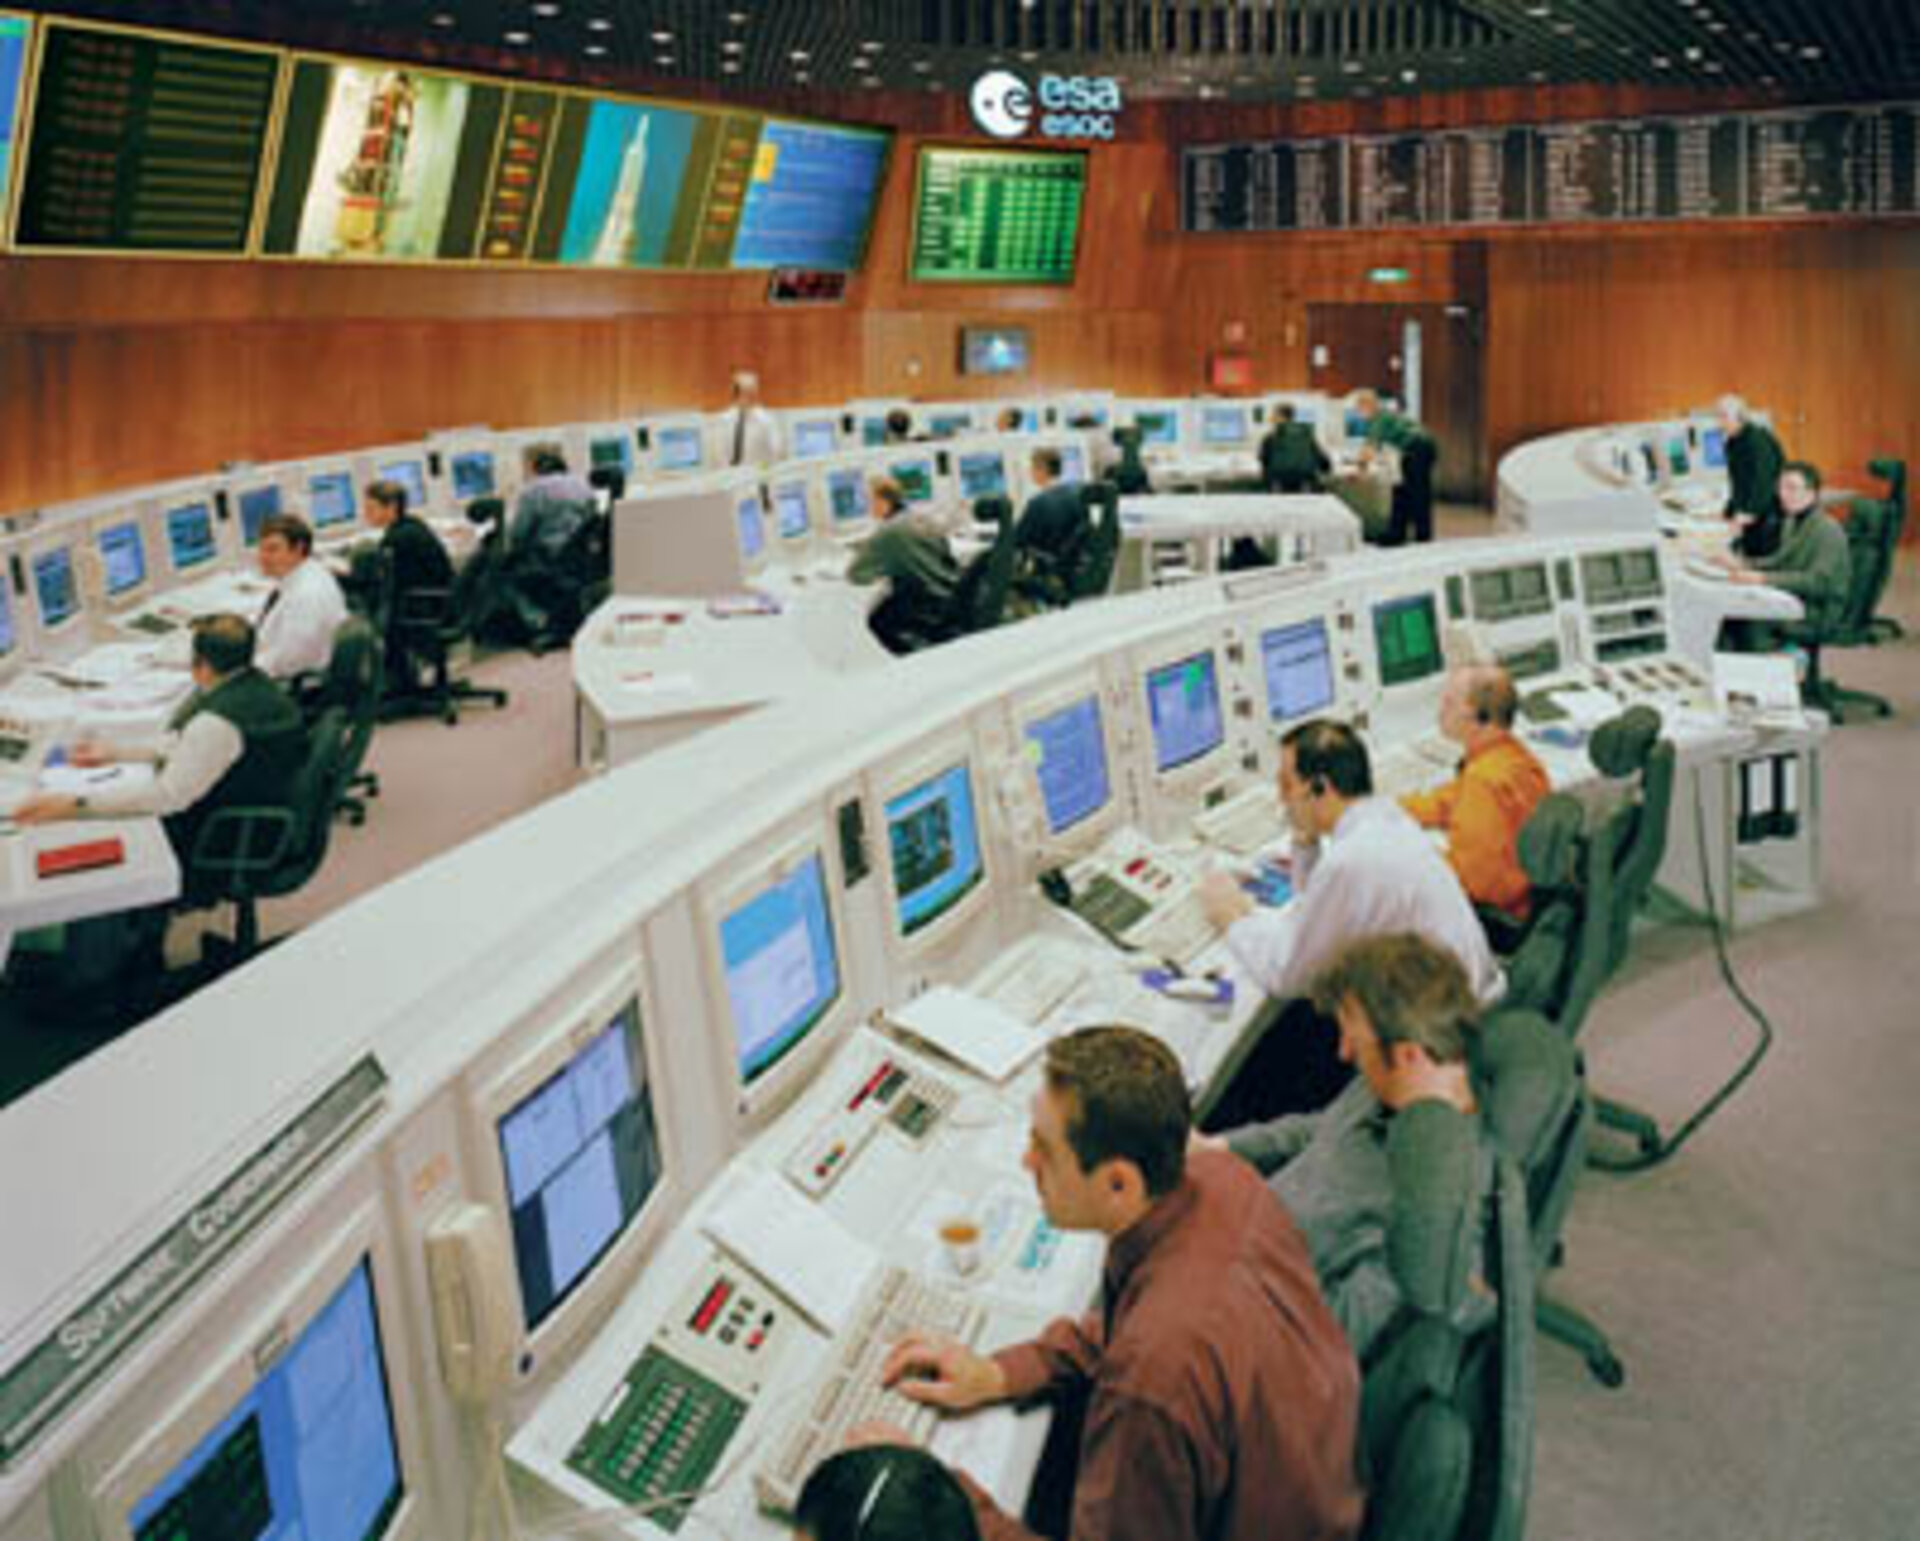 For some project managers, their mission ends at launch, but for others in Mission Control at ESOC it goes on